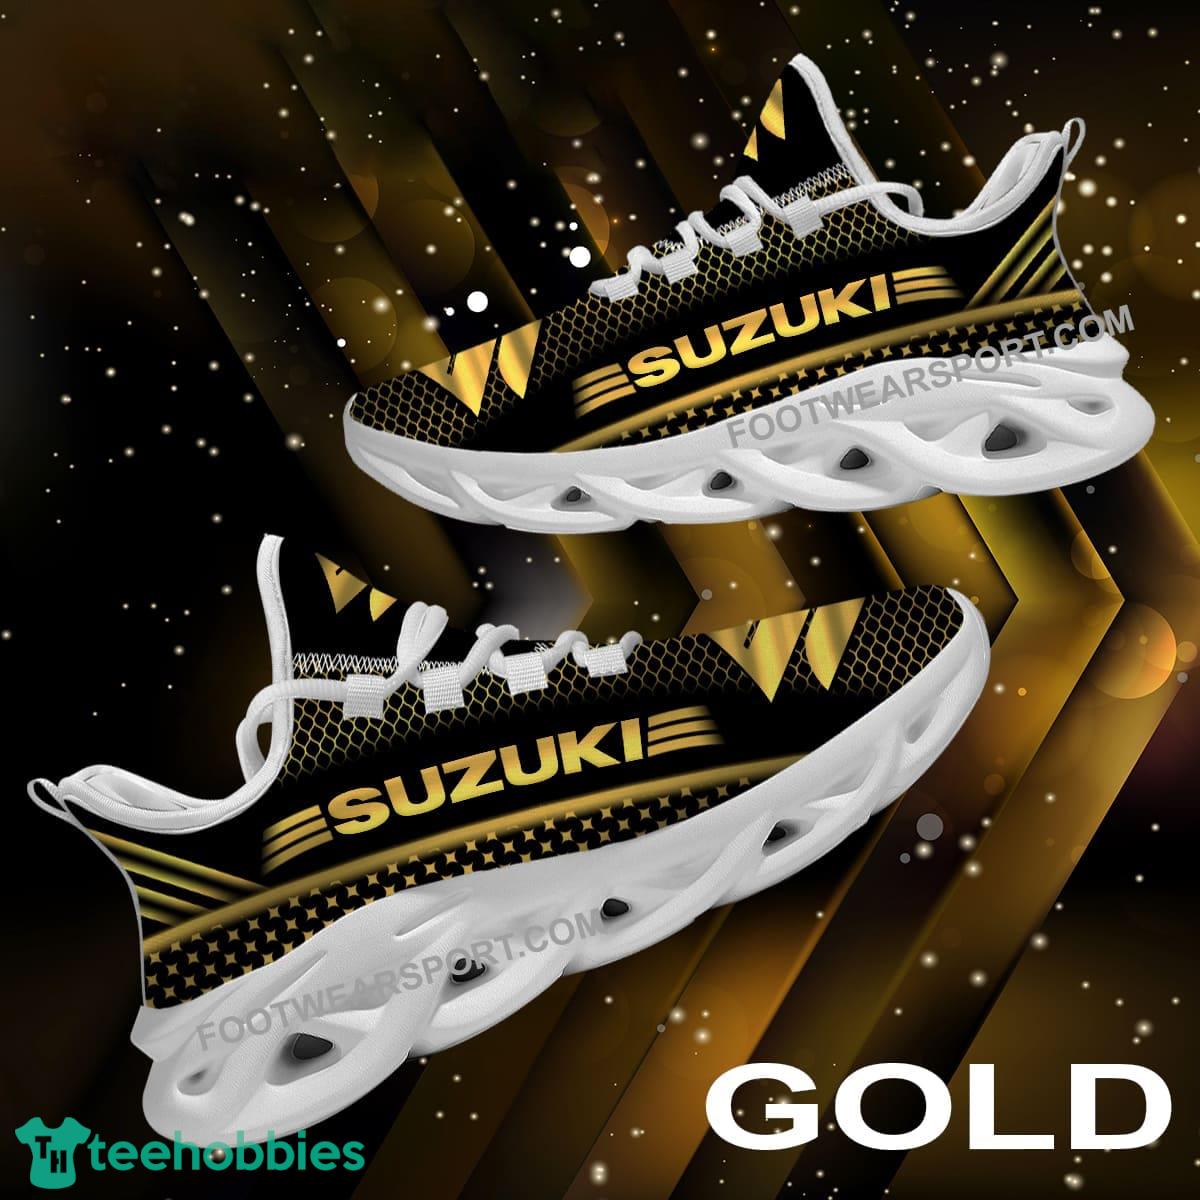 Suzuki Motorcycle Max Soul Shoes Gold Sport Sneaker Insignia For Fans Gift - Suzuki Motorcycle Max Soul Shoes Gold Sport Sneaker Insignia For Fans Gift